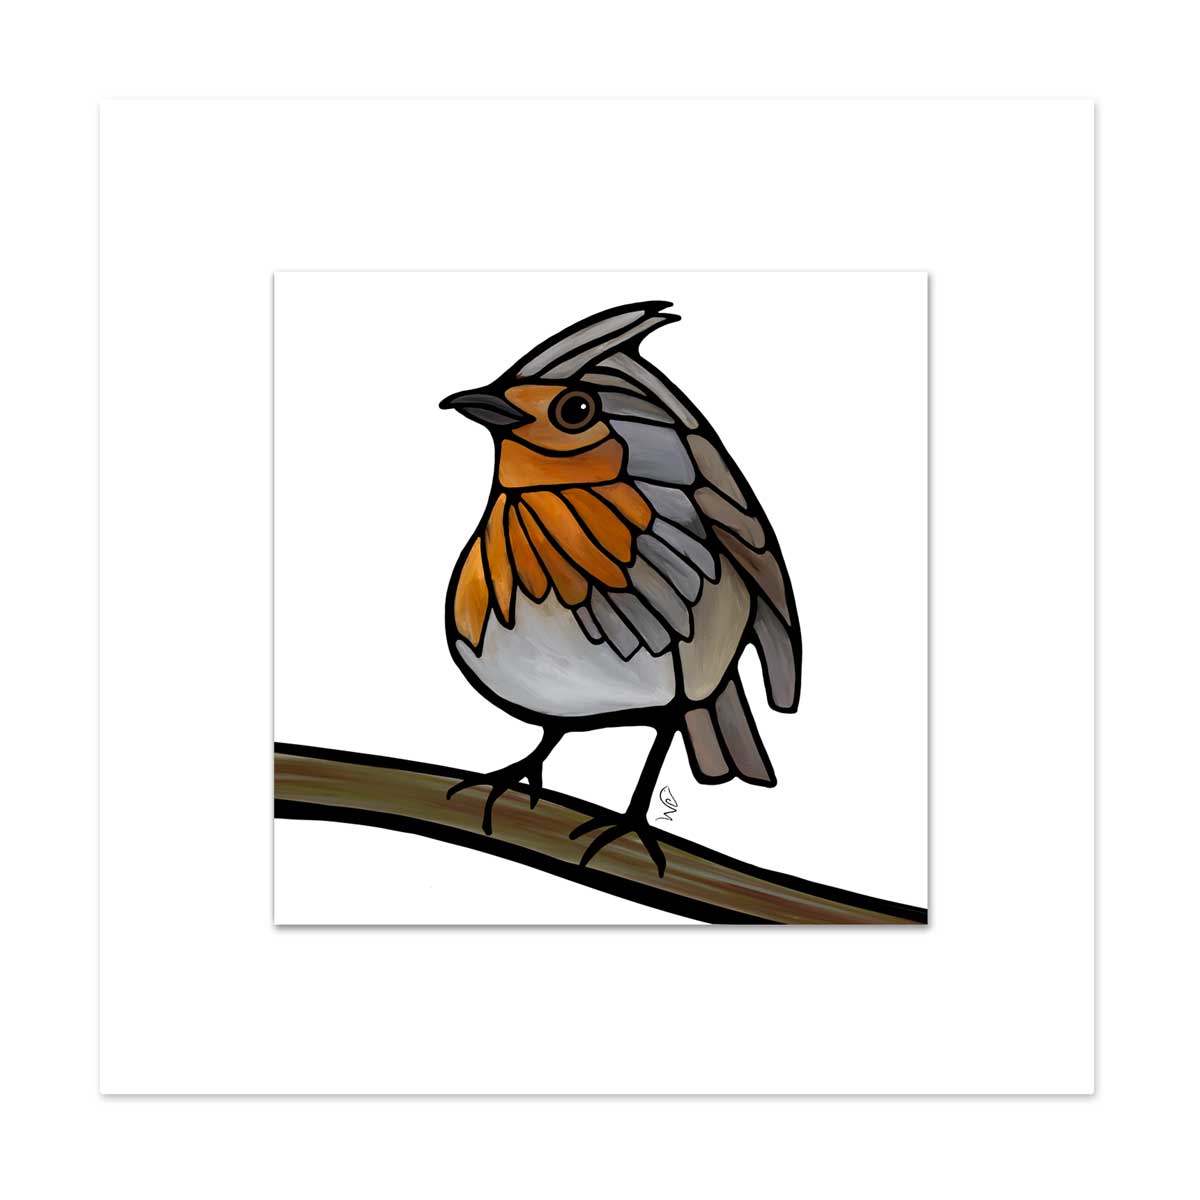 Signed & Matted Print - European Robin